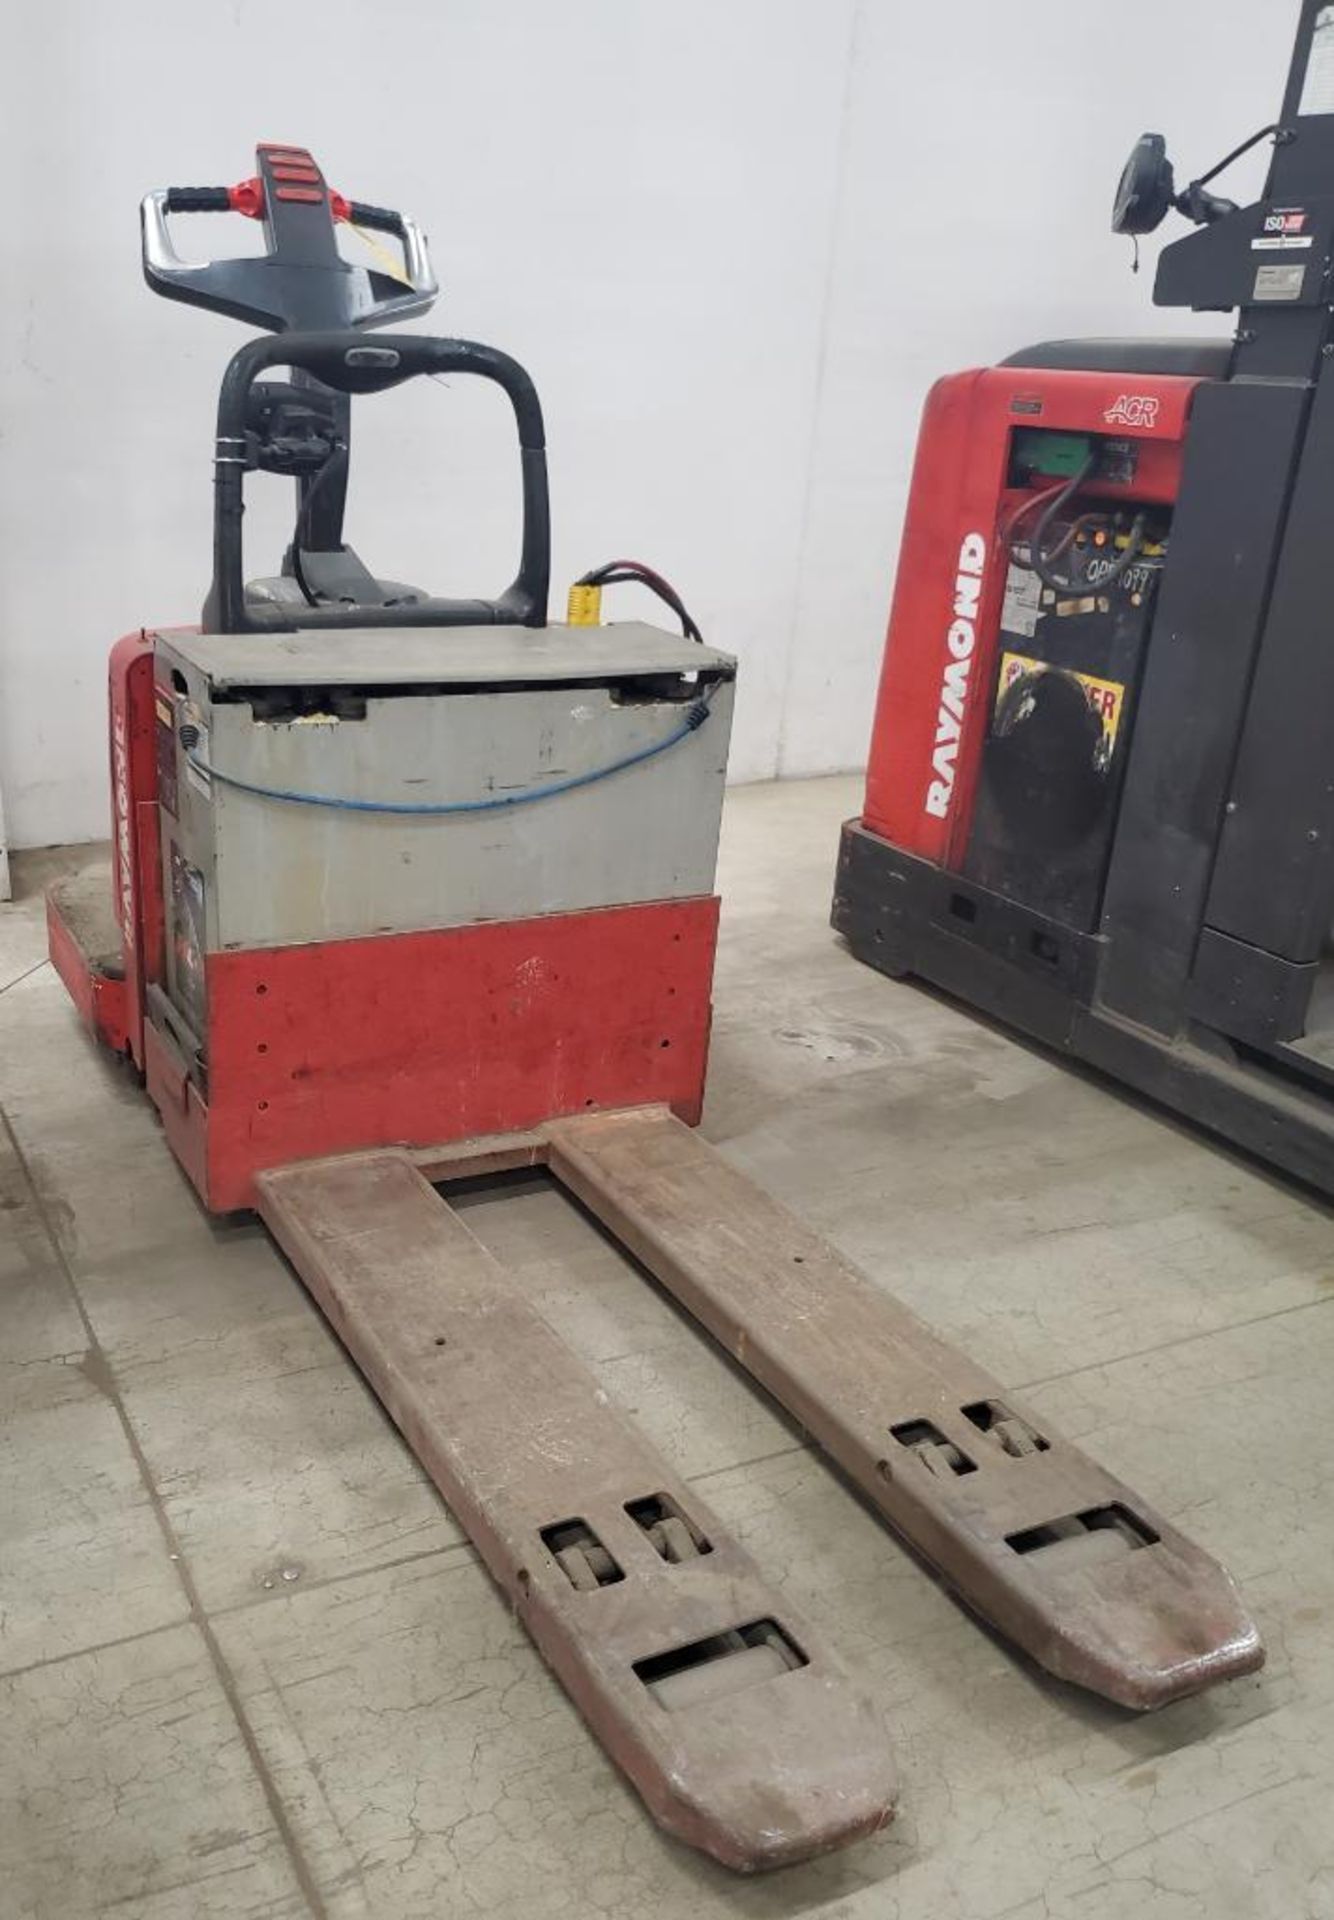 1999 RAYMOND 6,000 LB. CAPACITY ELECTRIC PALLET TRUCK; MODEL 112TM-FRE60L, S/N 112-99-26329, WITH